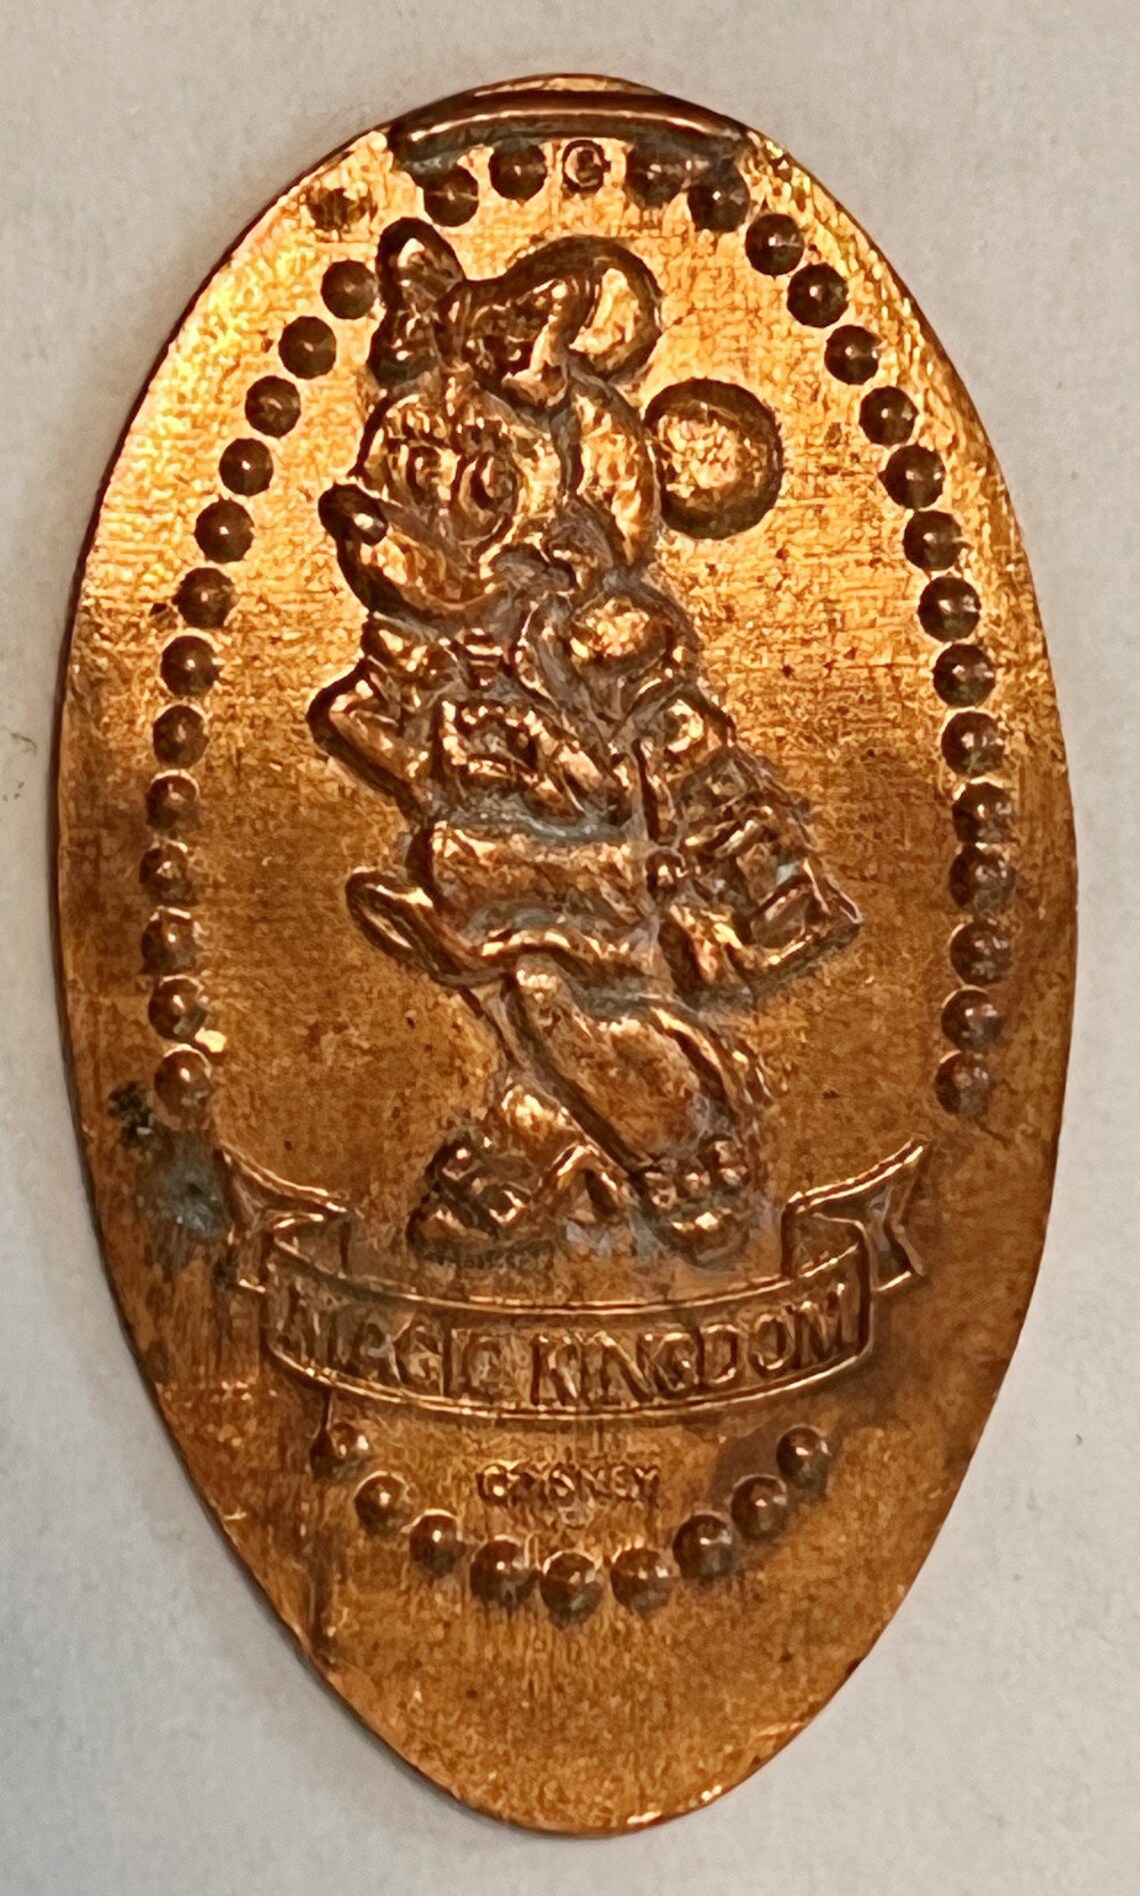 Minnie Mouse Magic Kingdom Elongated Penny Squished Penny - Etsy